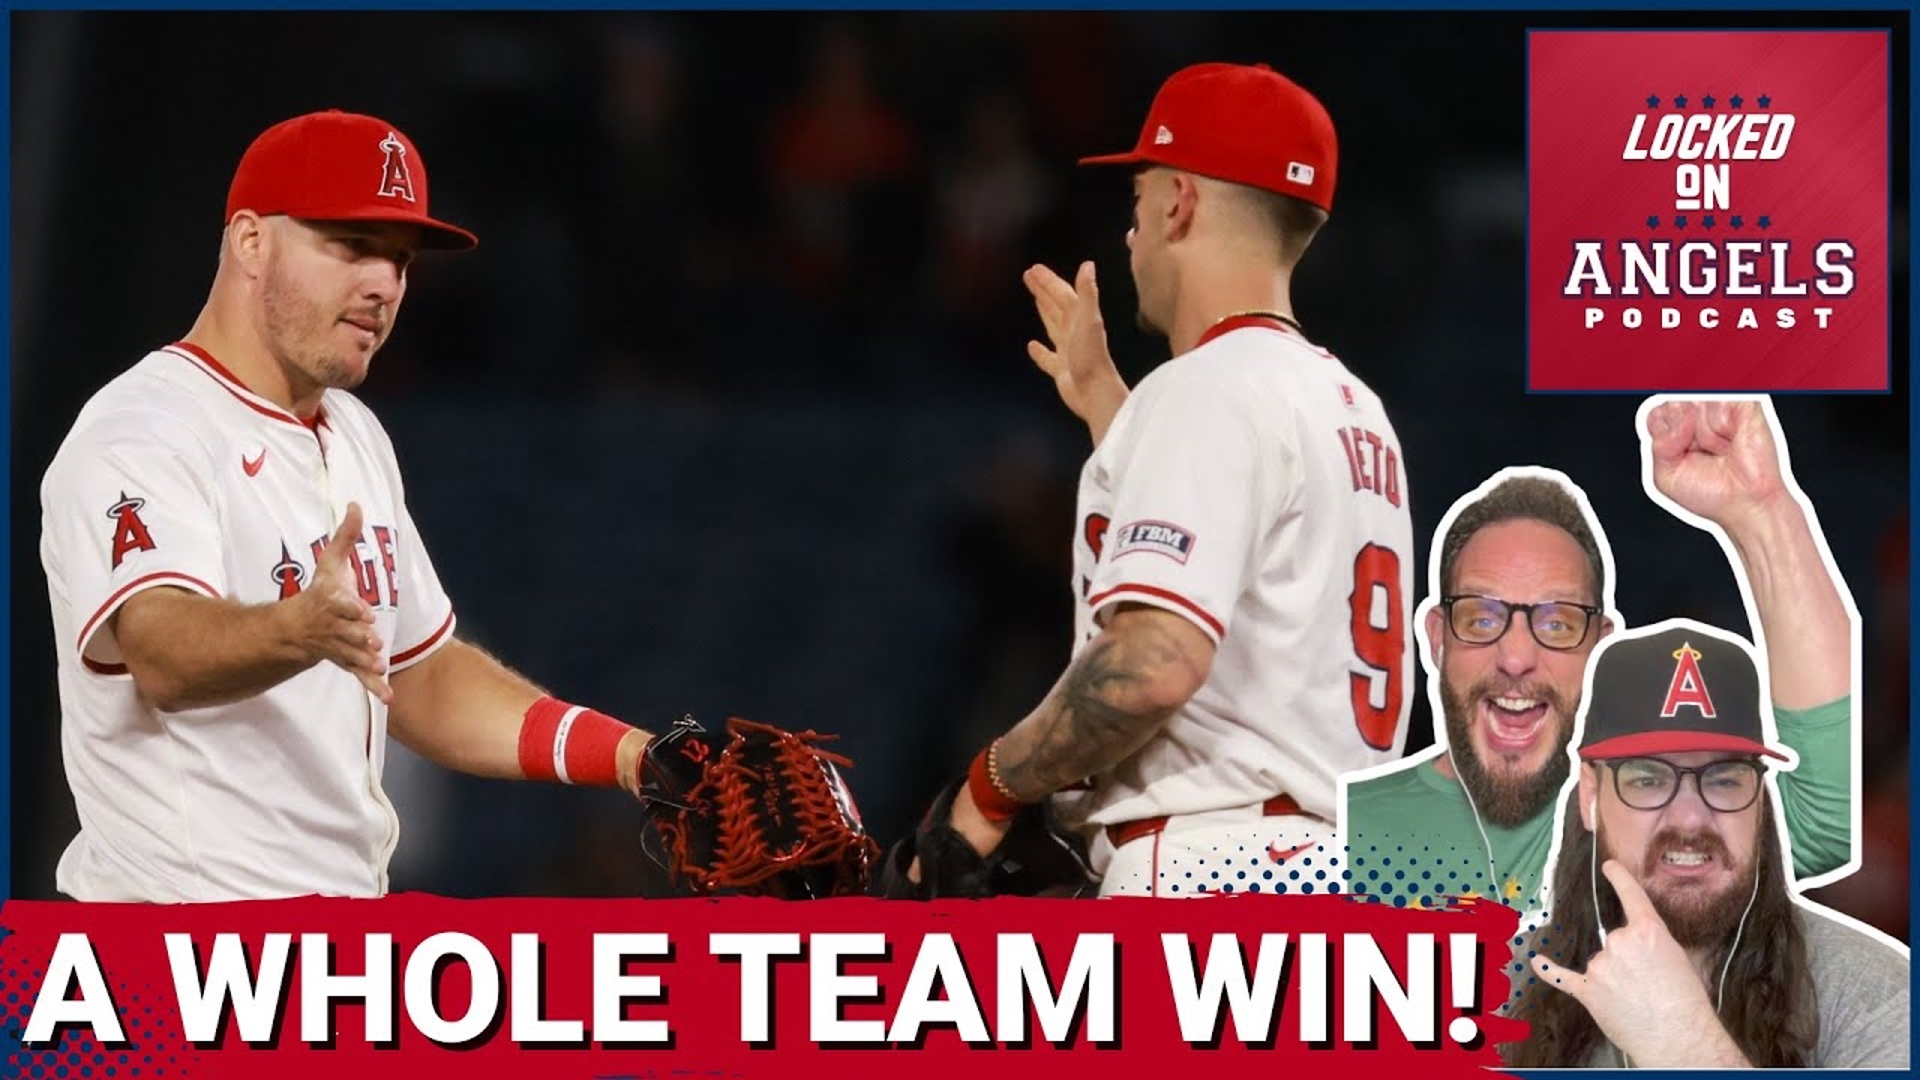 The Los Angeles Angels put together a nice team effort to snap their losing streak and pick up a win against the Orioles on Tuesday night!